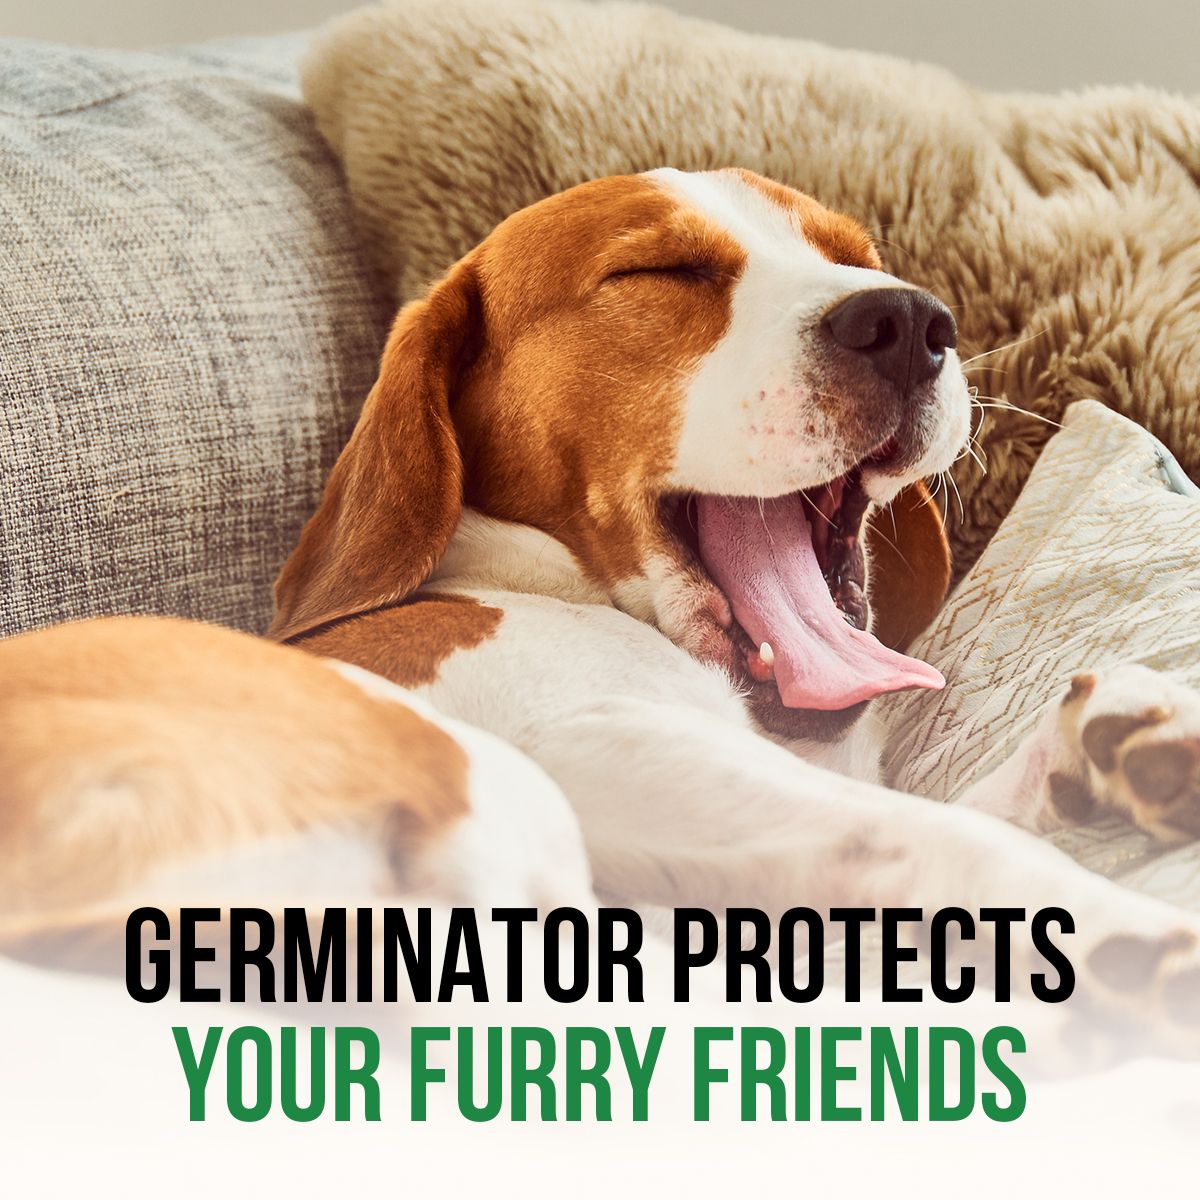 Germinator Protects Your Furry Friends